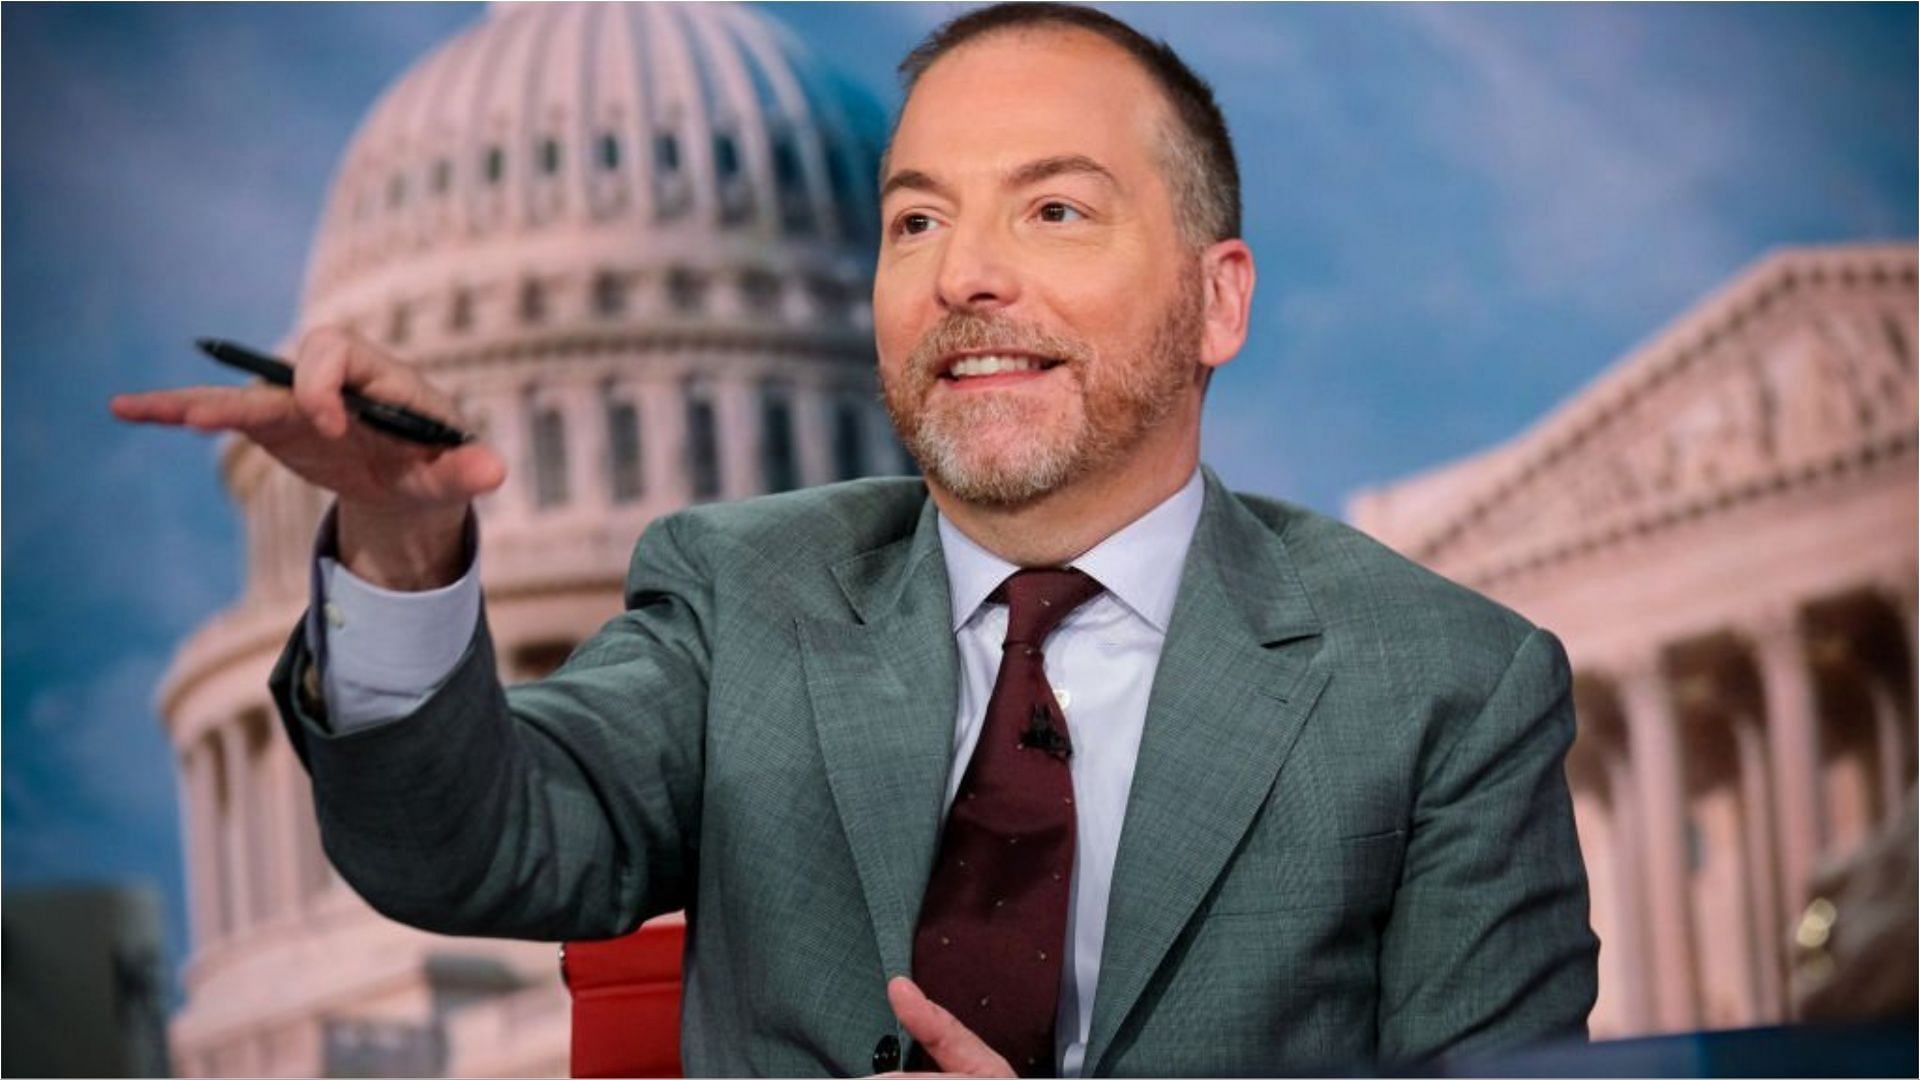 Chuck Todd has stepped down as the host of Meet the Press (Image via William B. Plowman/Getty Images)